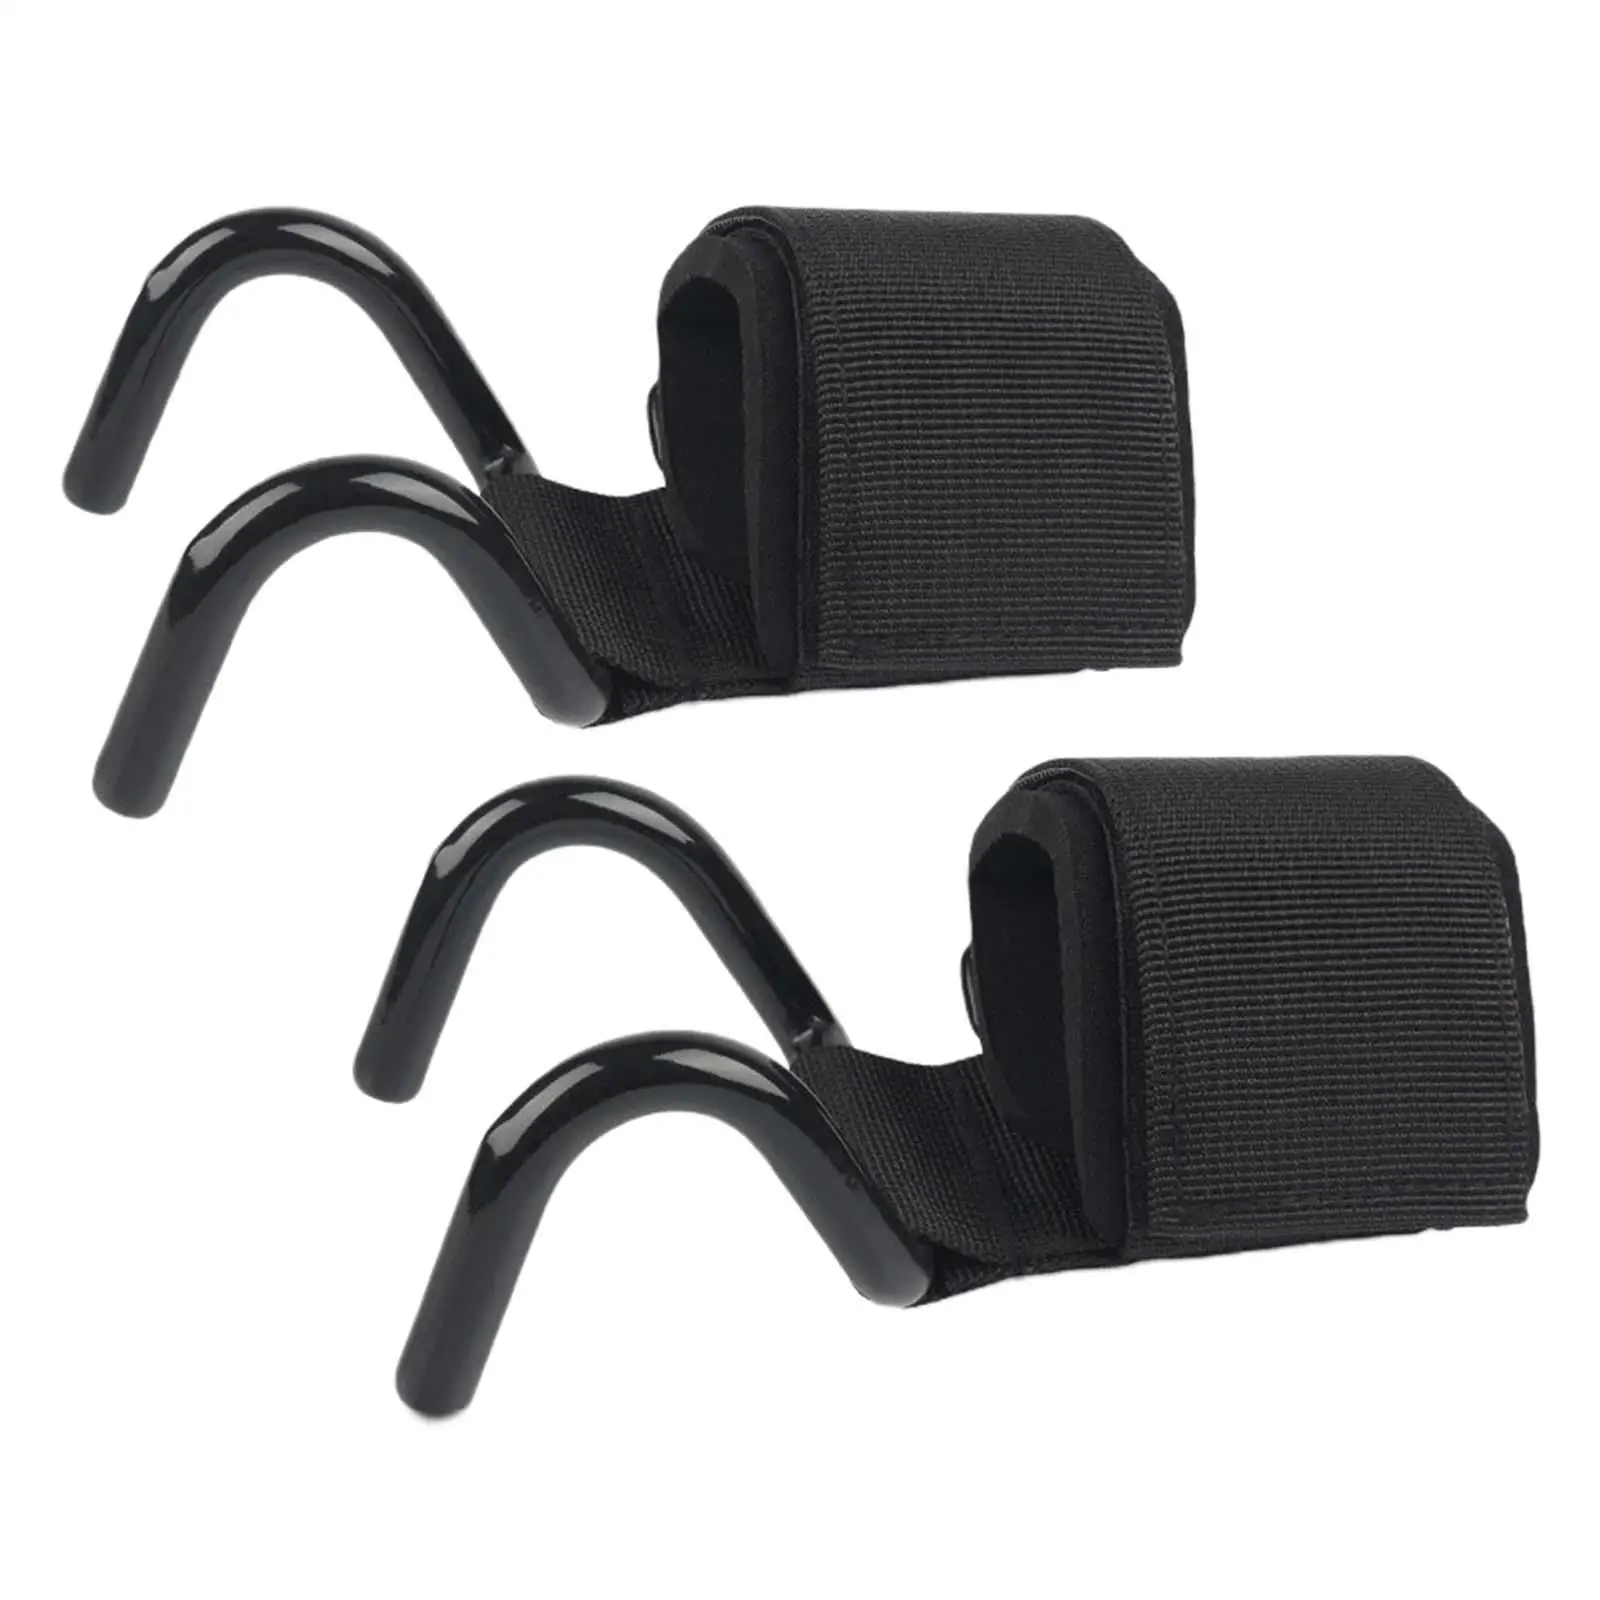 Lifting Wrist Straps Weight Lifting Hooks for Weightlifting Exercise Sports